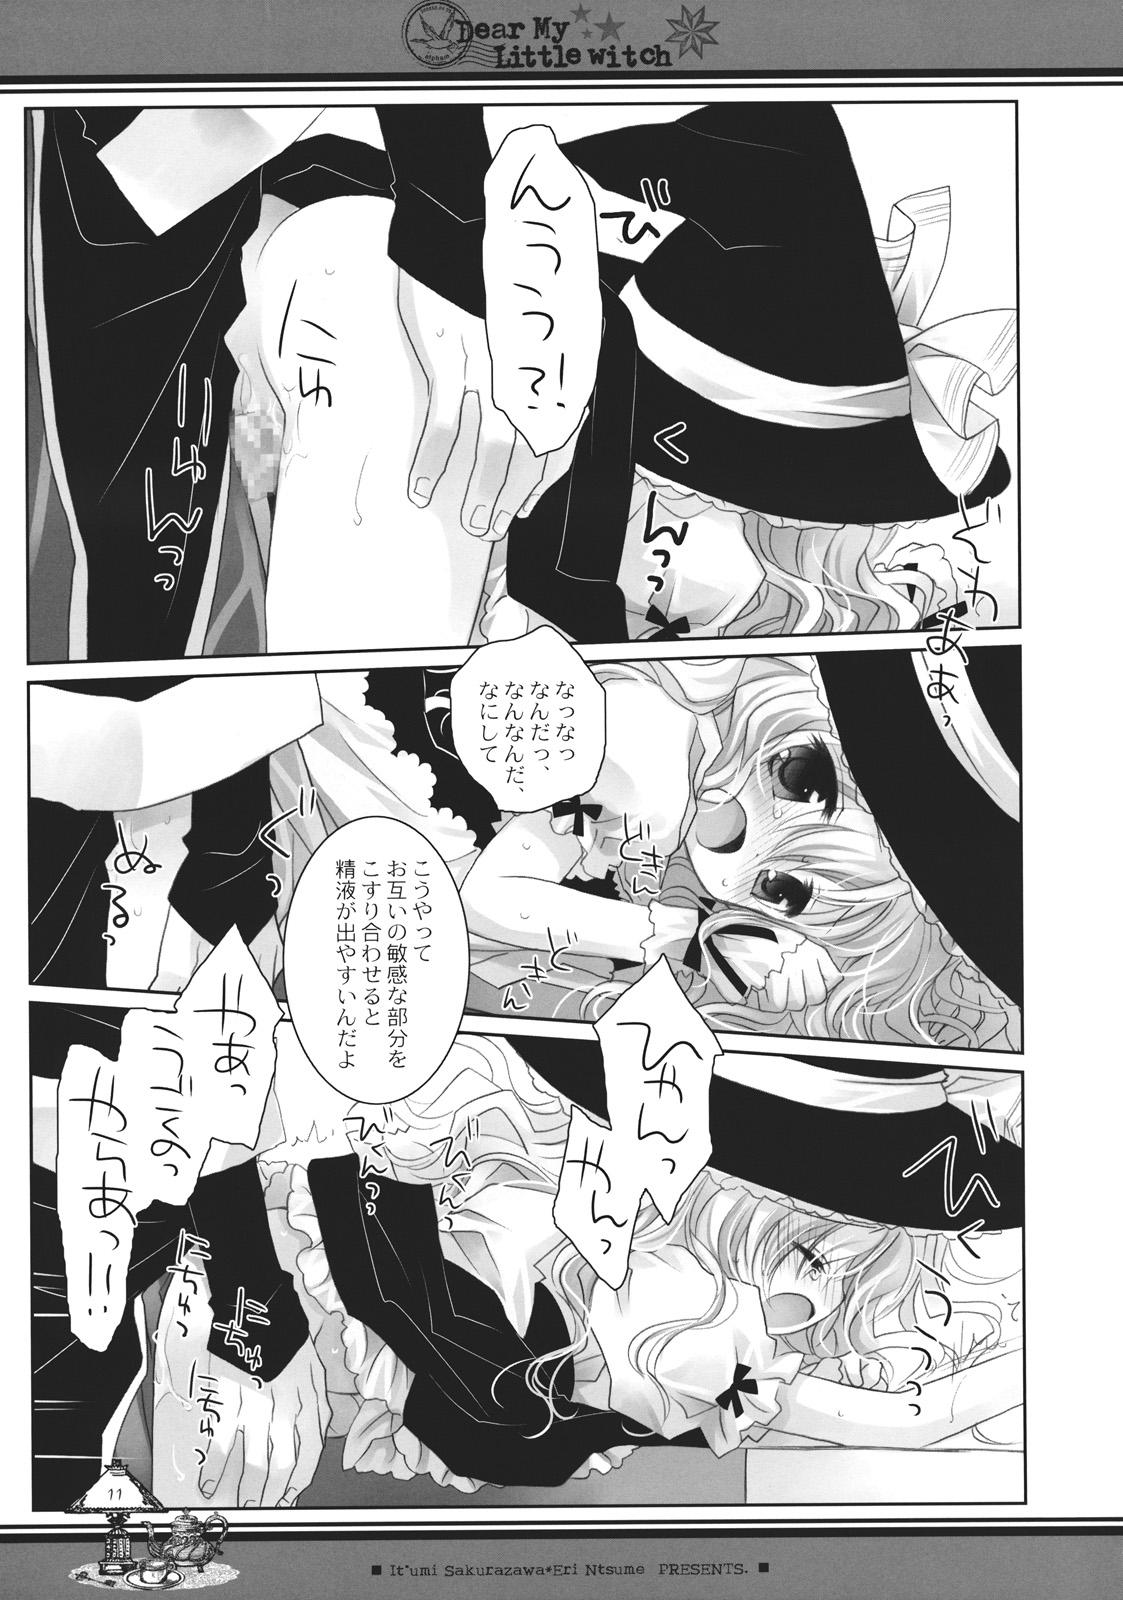 Viet Nam Dear My Little Witch - Touhou project Gay Money - Page 11